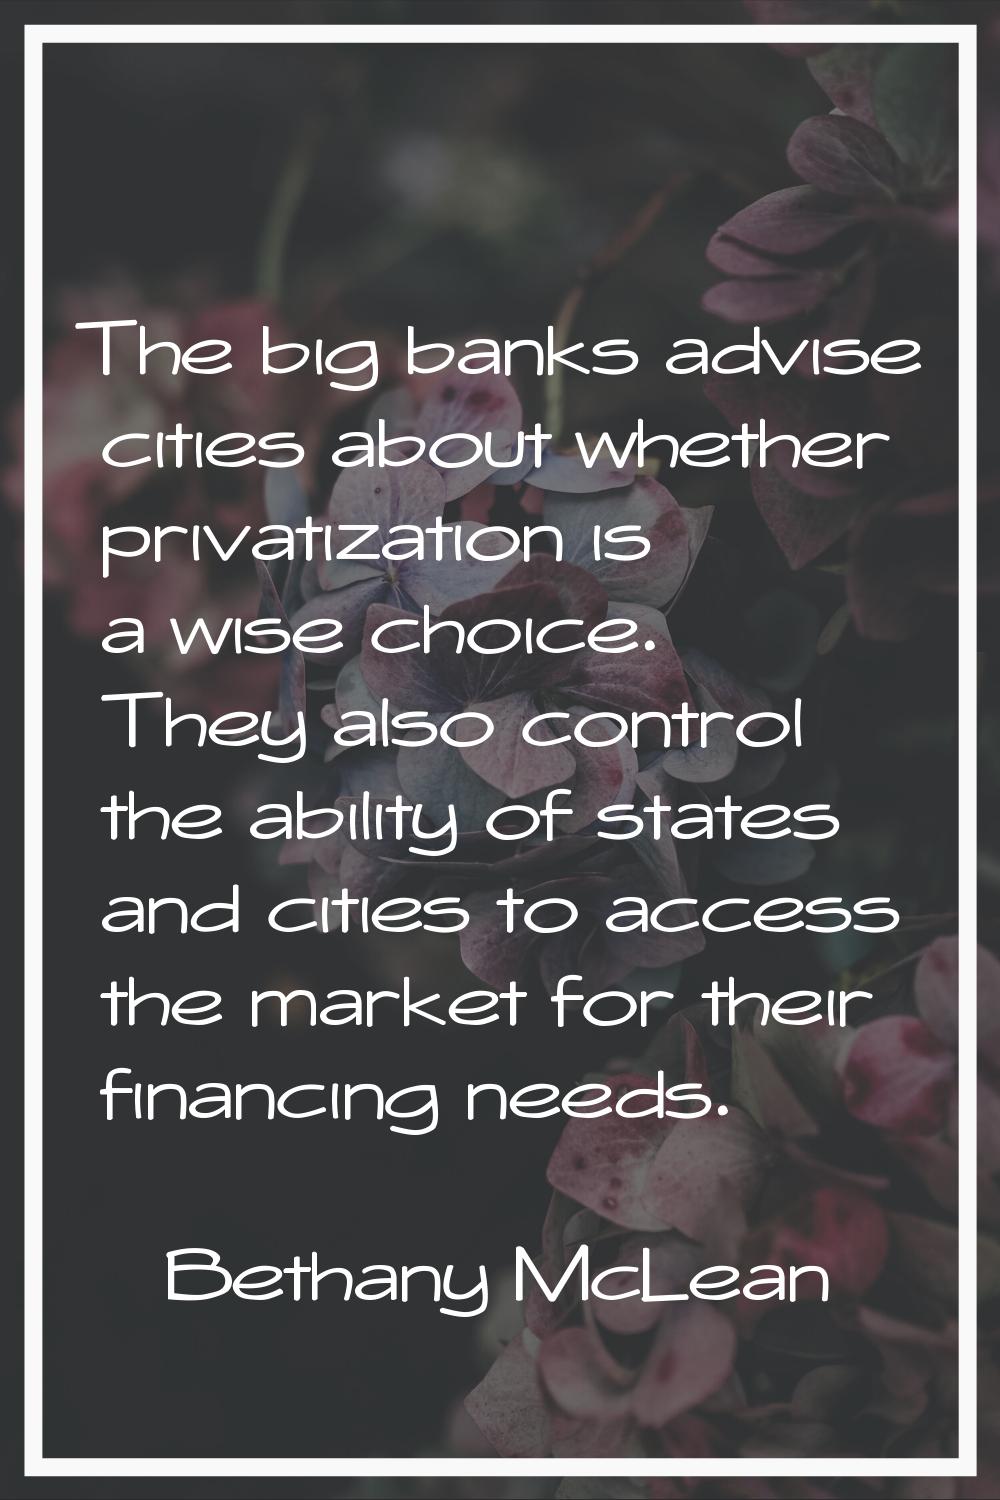 The big banks advise cities about whether privatization is a wise choice. They also control the abi